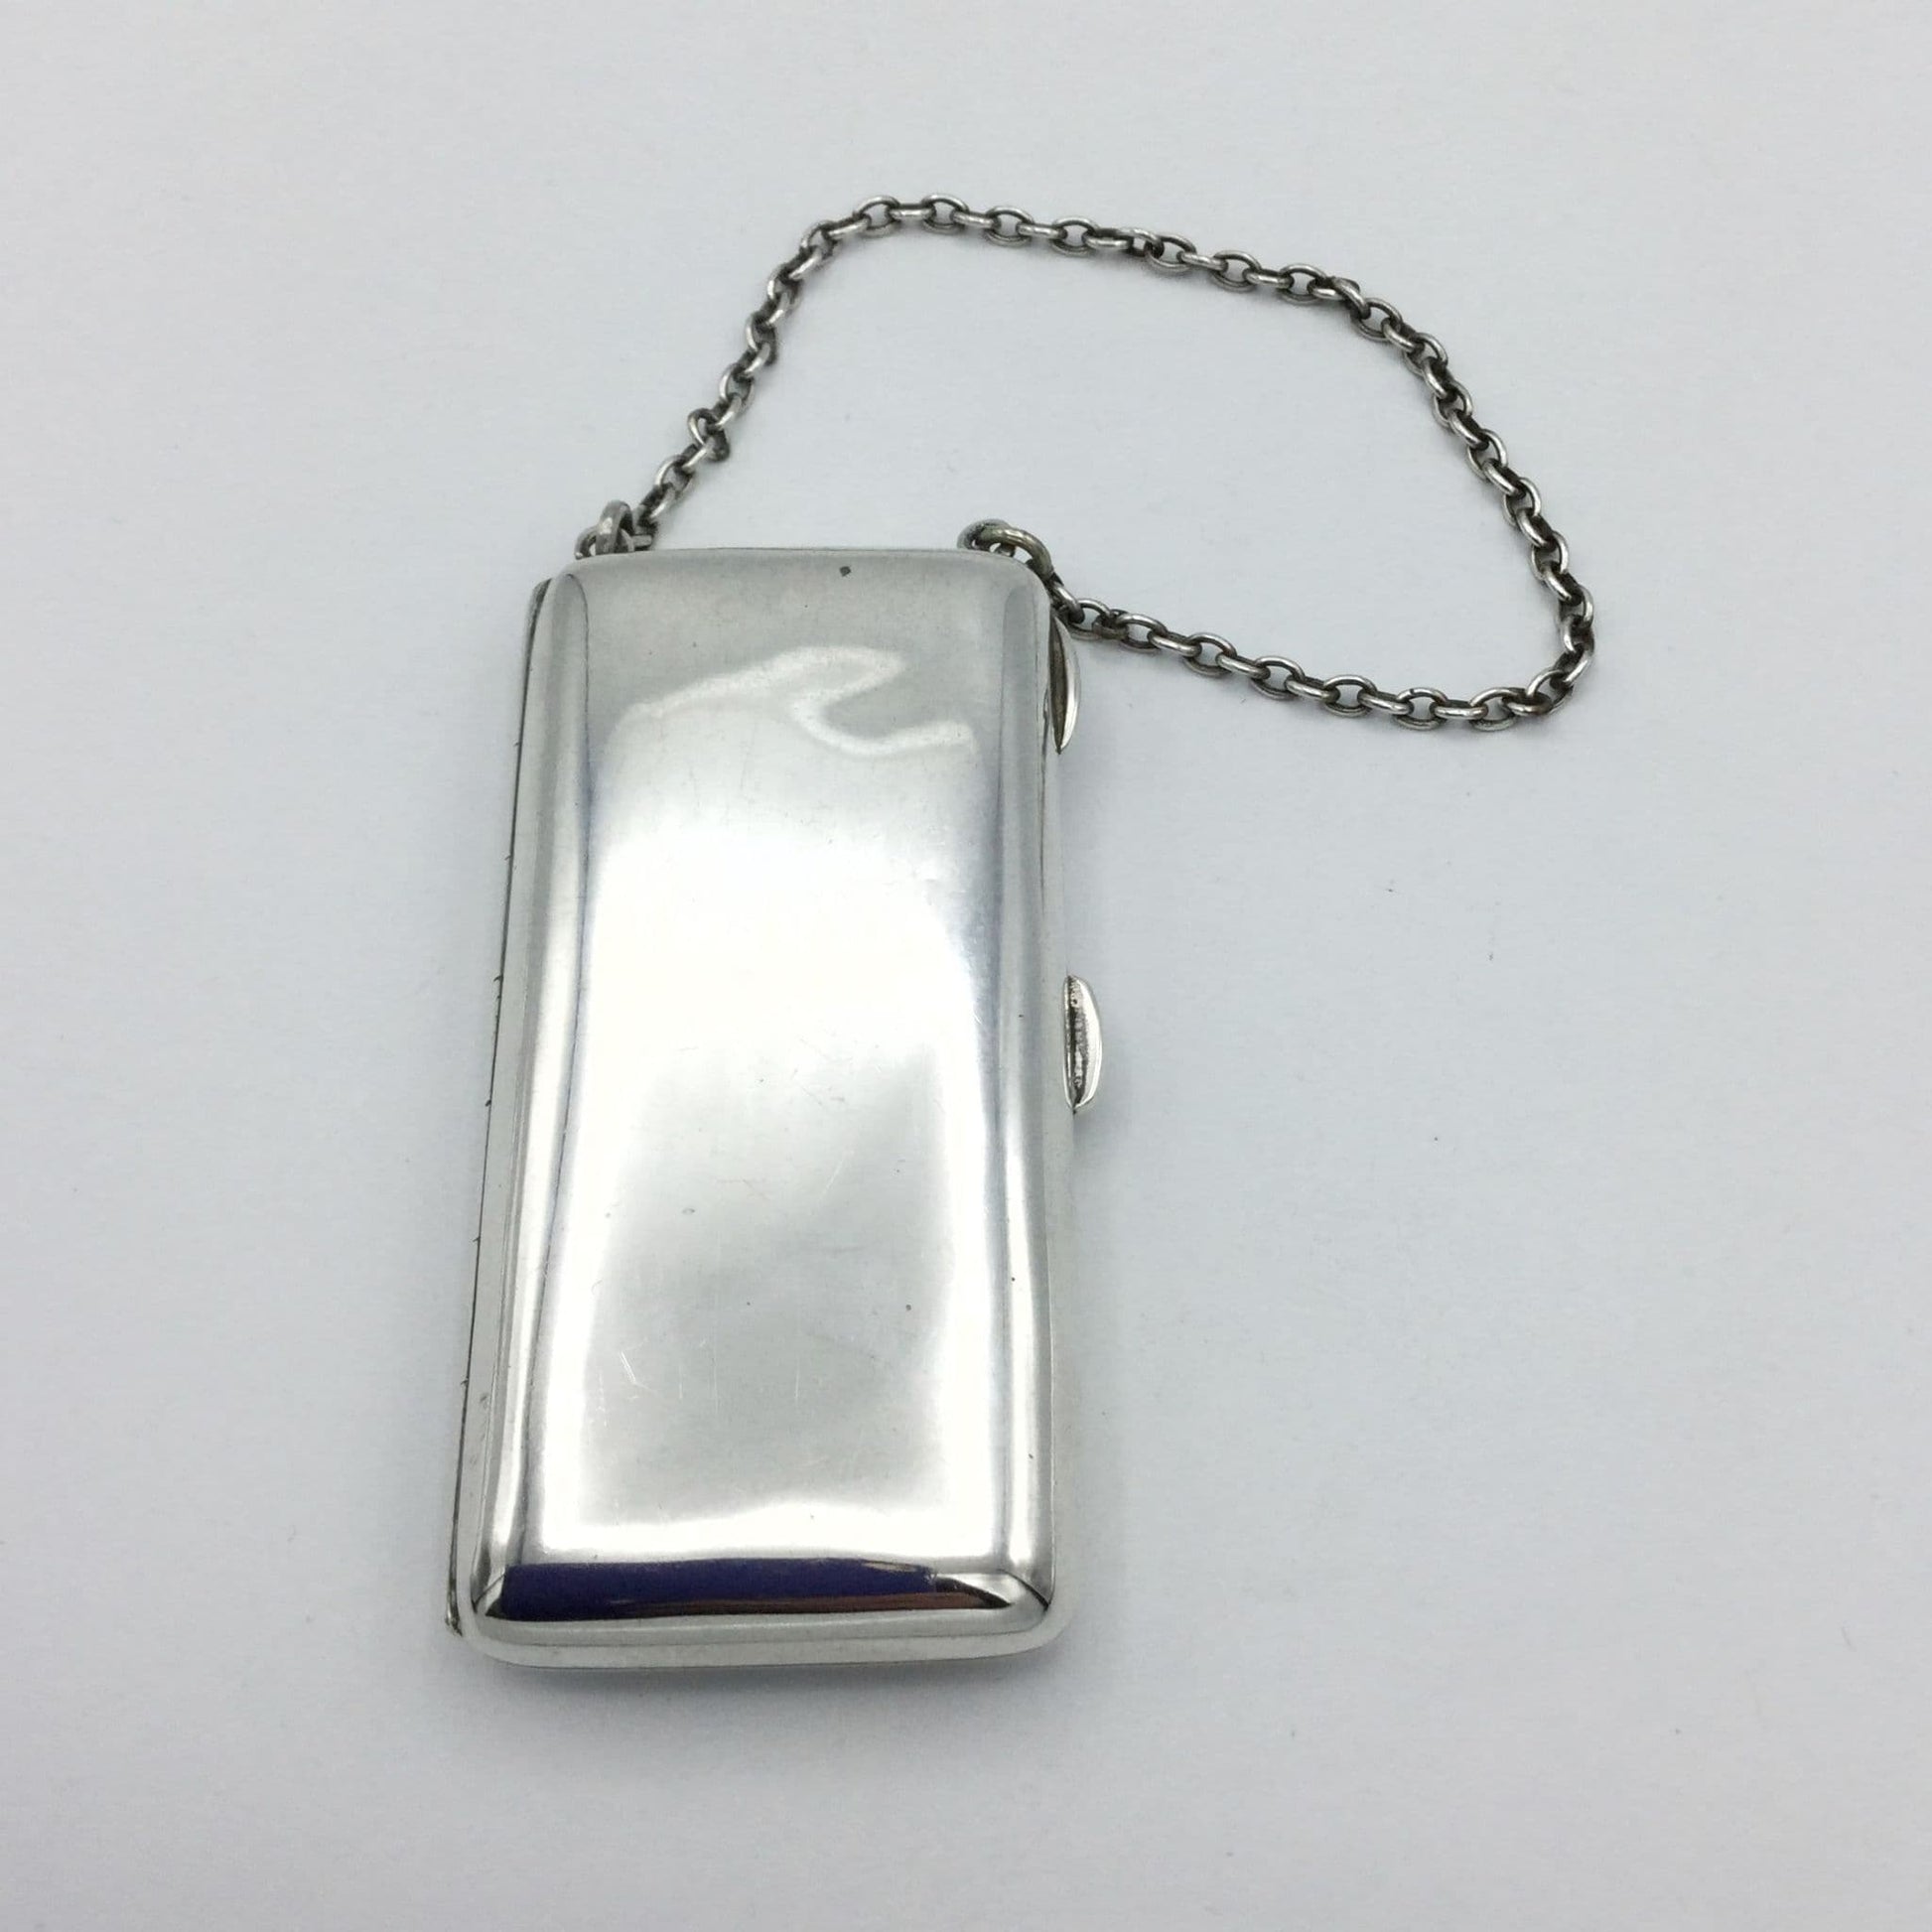 Shiny Silver case with chatelaine chain on white background